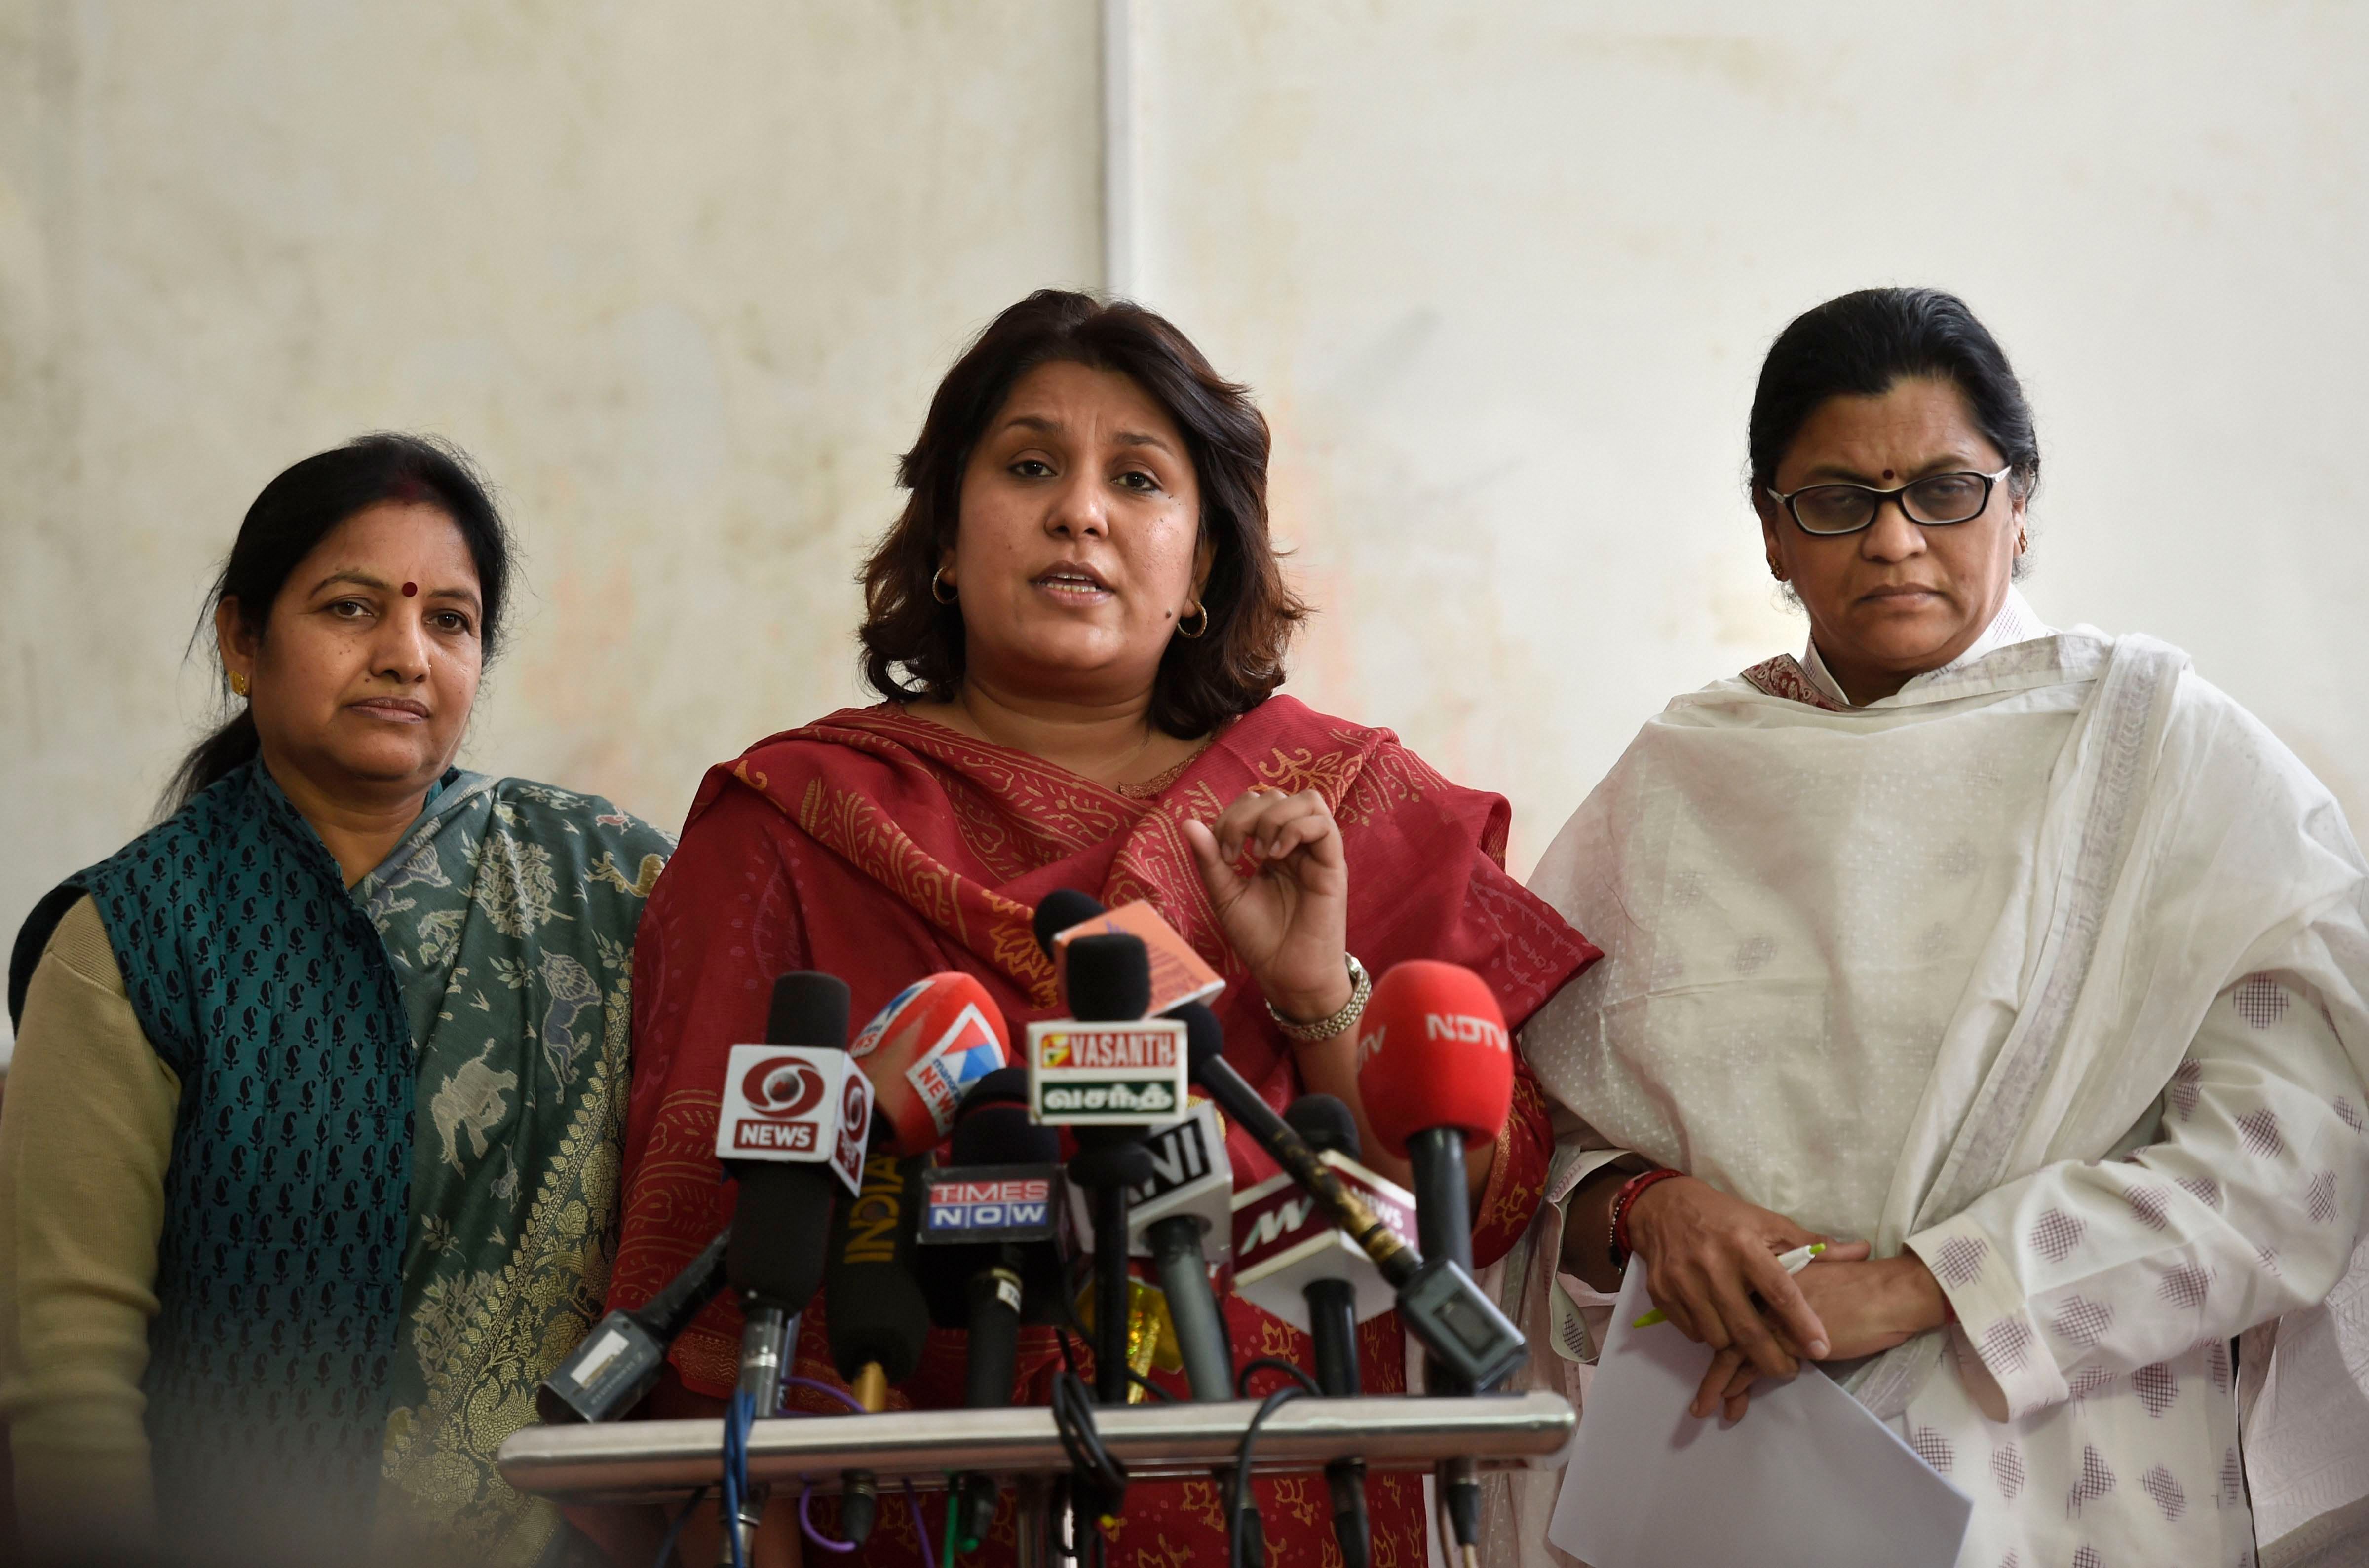 Congress MPs Supriya Shrinate, Chhaya Verma and Amee Yajnik address the media at Parliament House during the ongoing Winter Session. (PTI Photo)